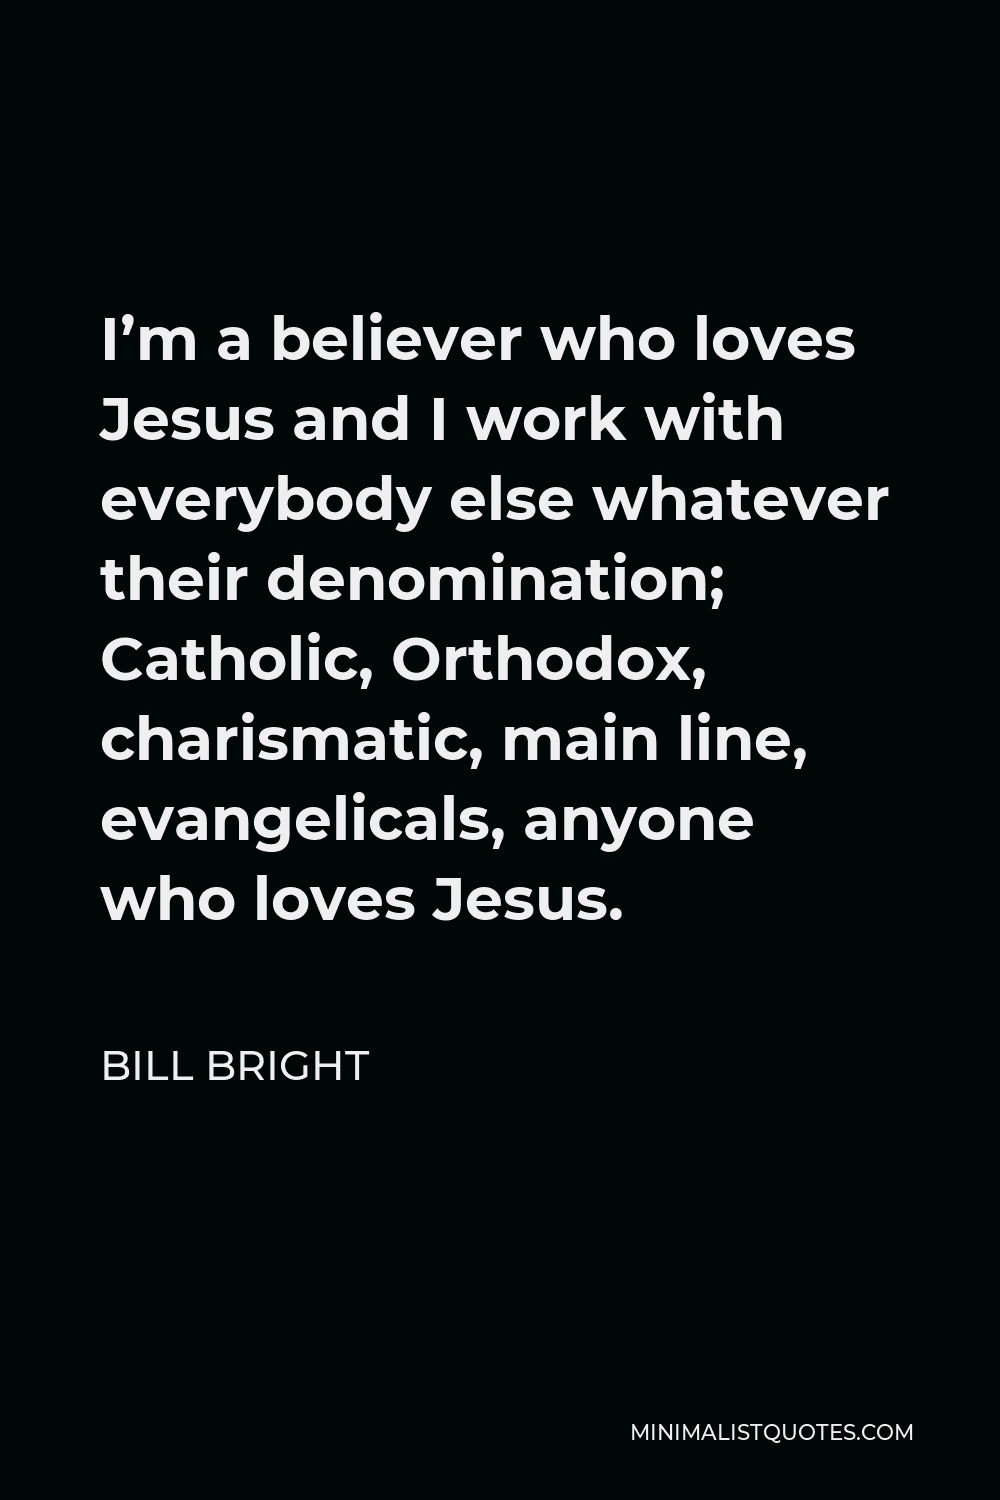 Bill Bright Quote - I’m a believer who loves Jesus and I work with everybody else whatever their denomination; Catholic, Orthodox, charismatic, main line, evangelicals, anyone who loves Jesus.